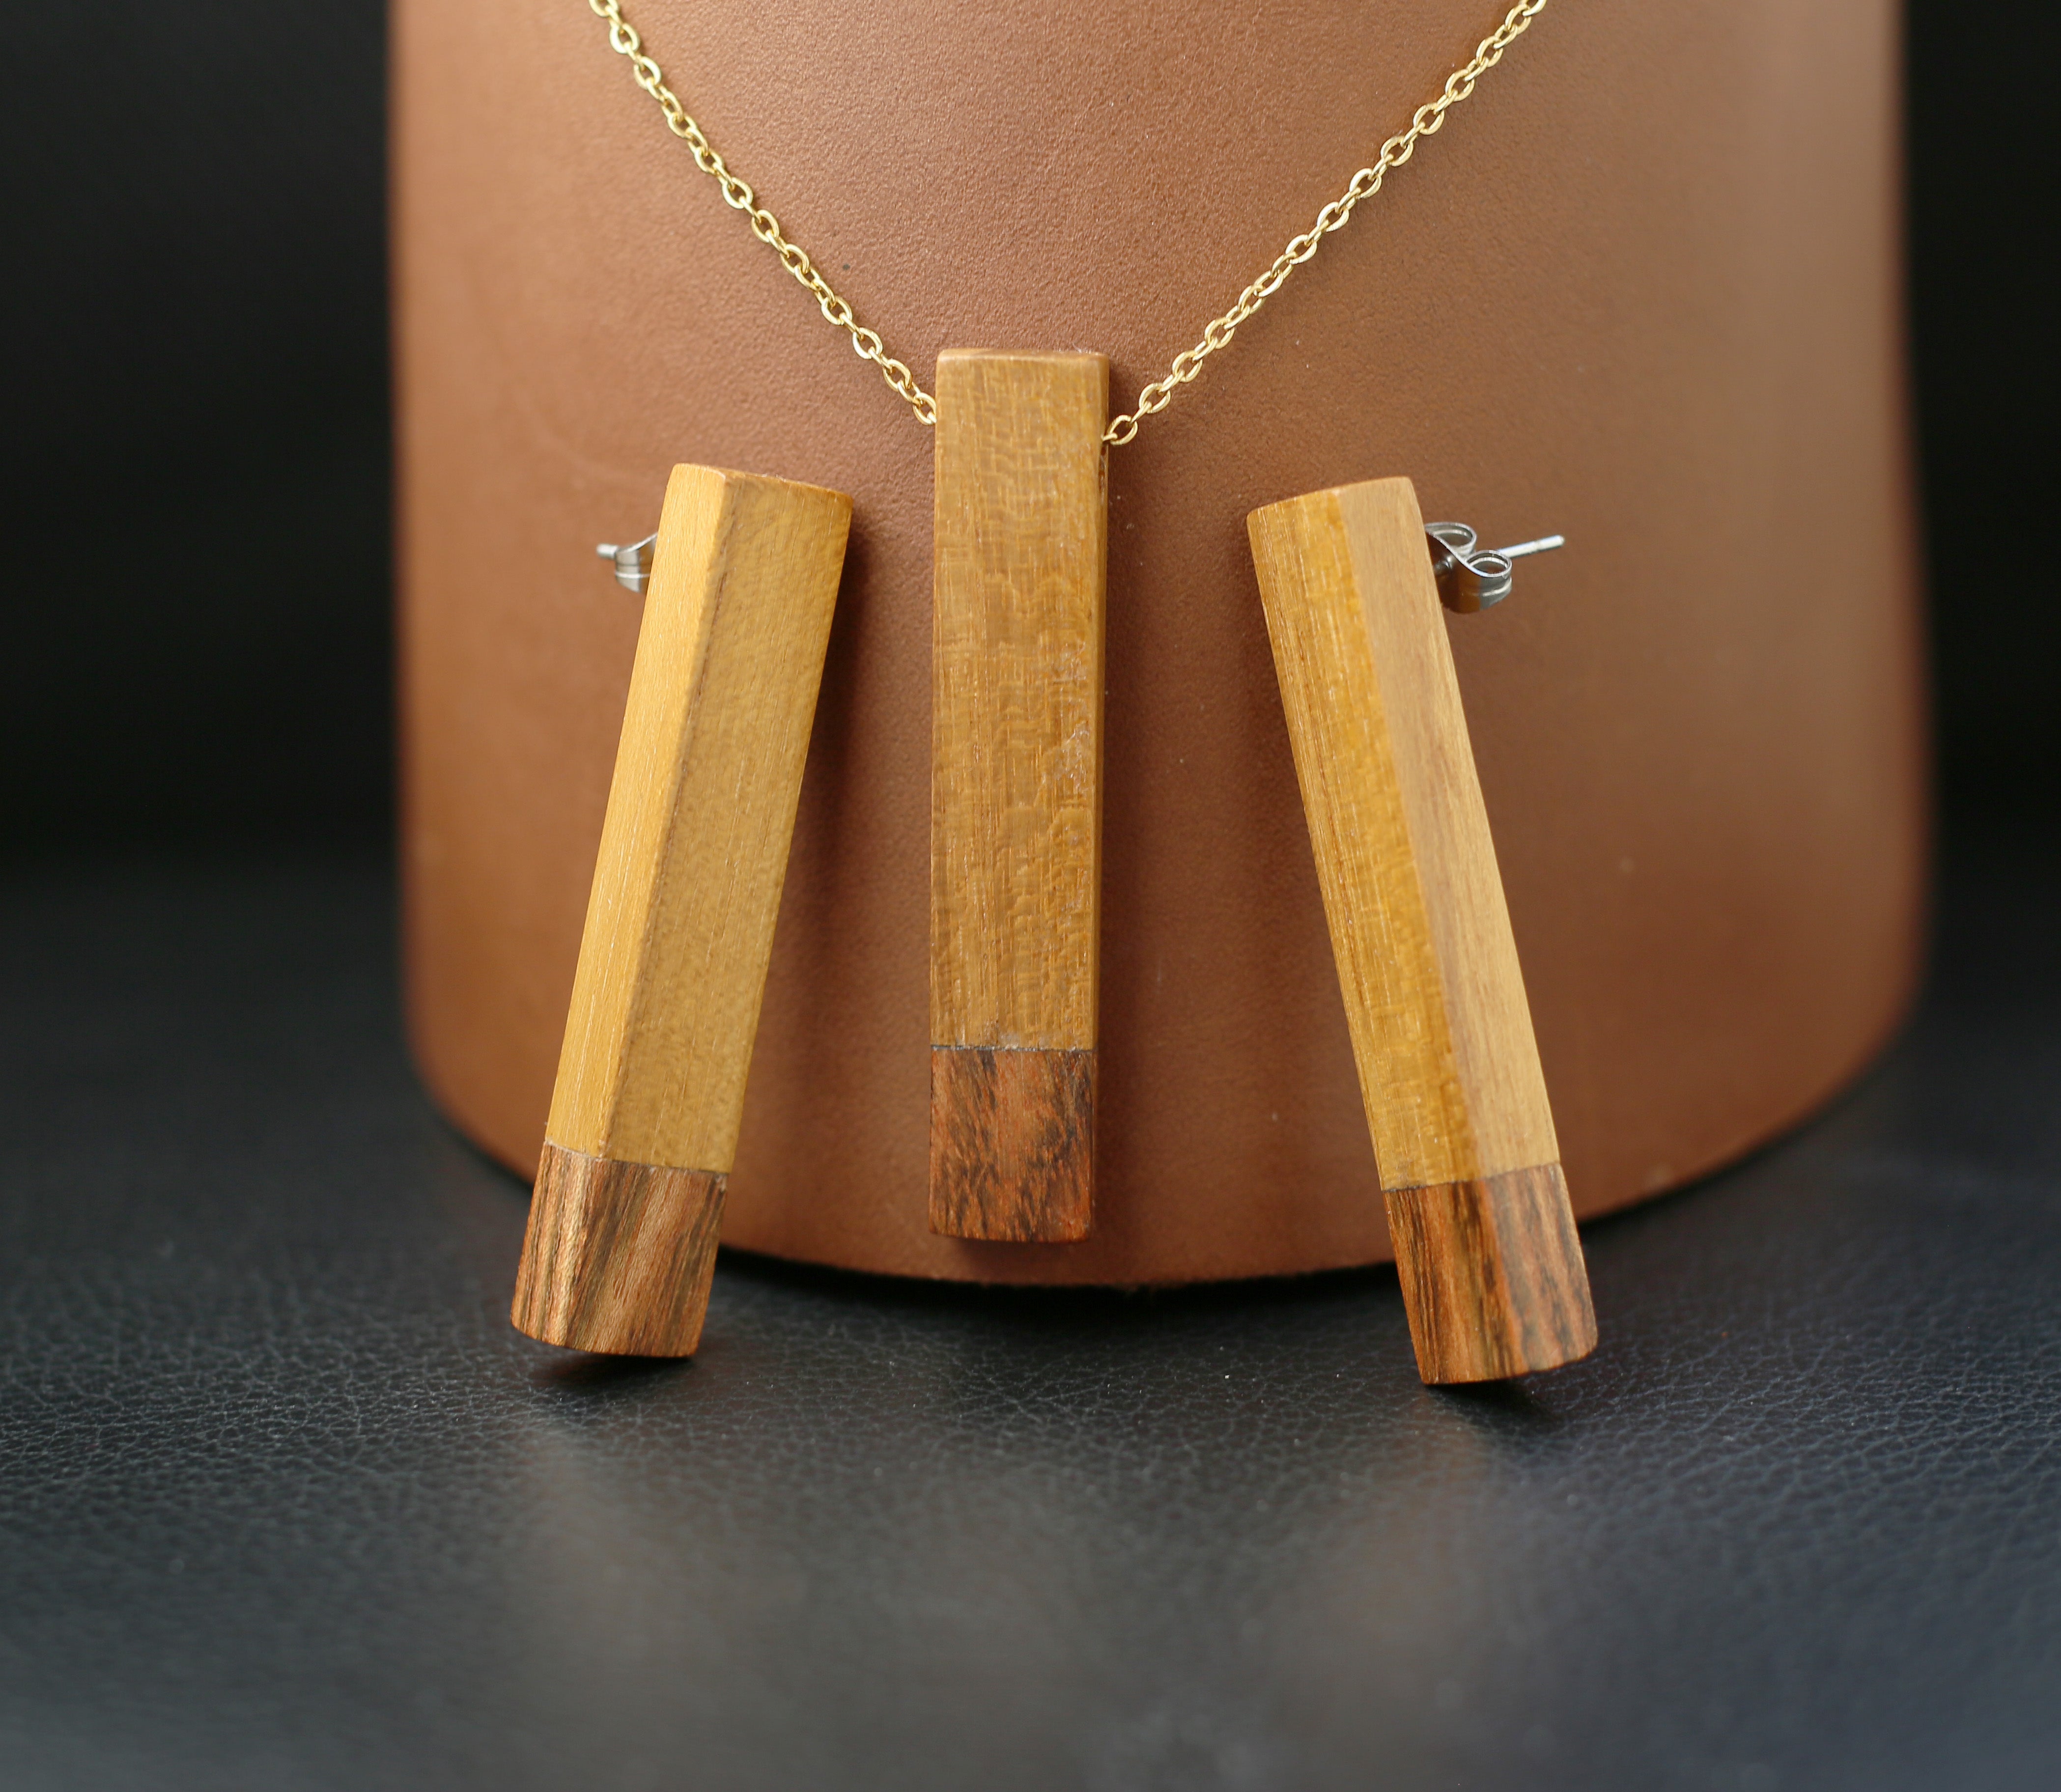 Wood jewelry set with ethnic stud earrings and necklace. Mayan earrings in exotic woods, golden surgical steel and hypoallergenic studs